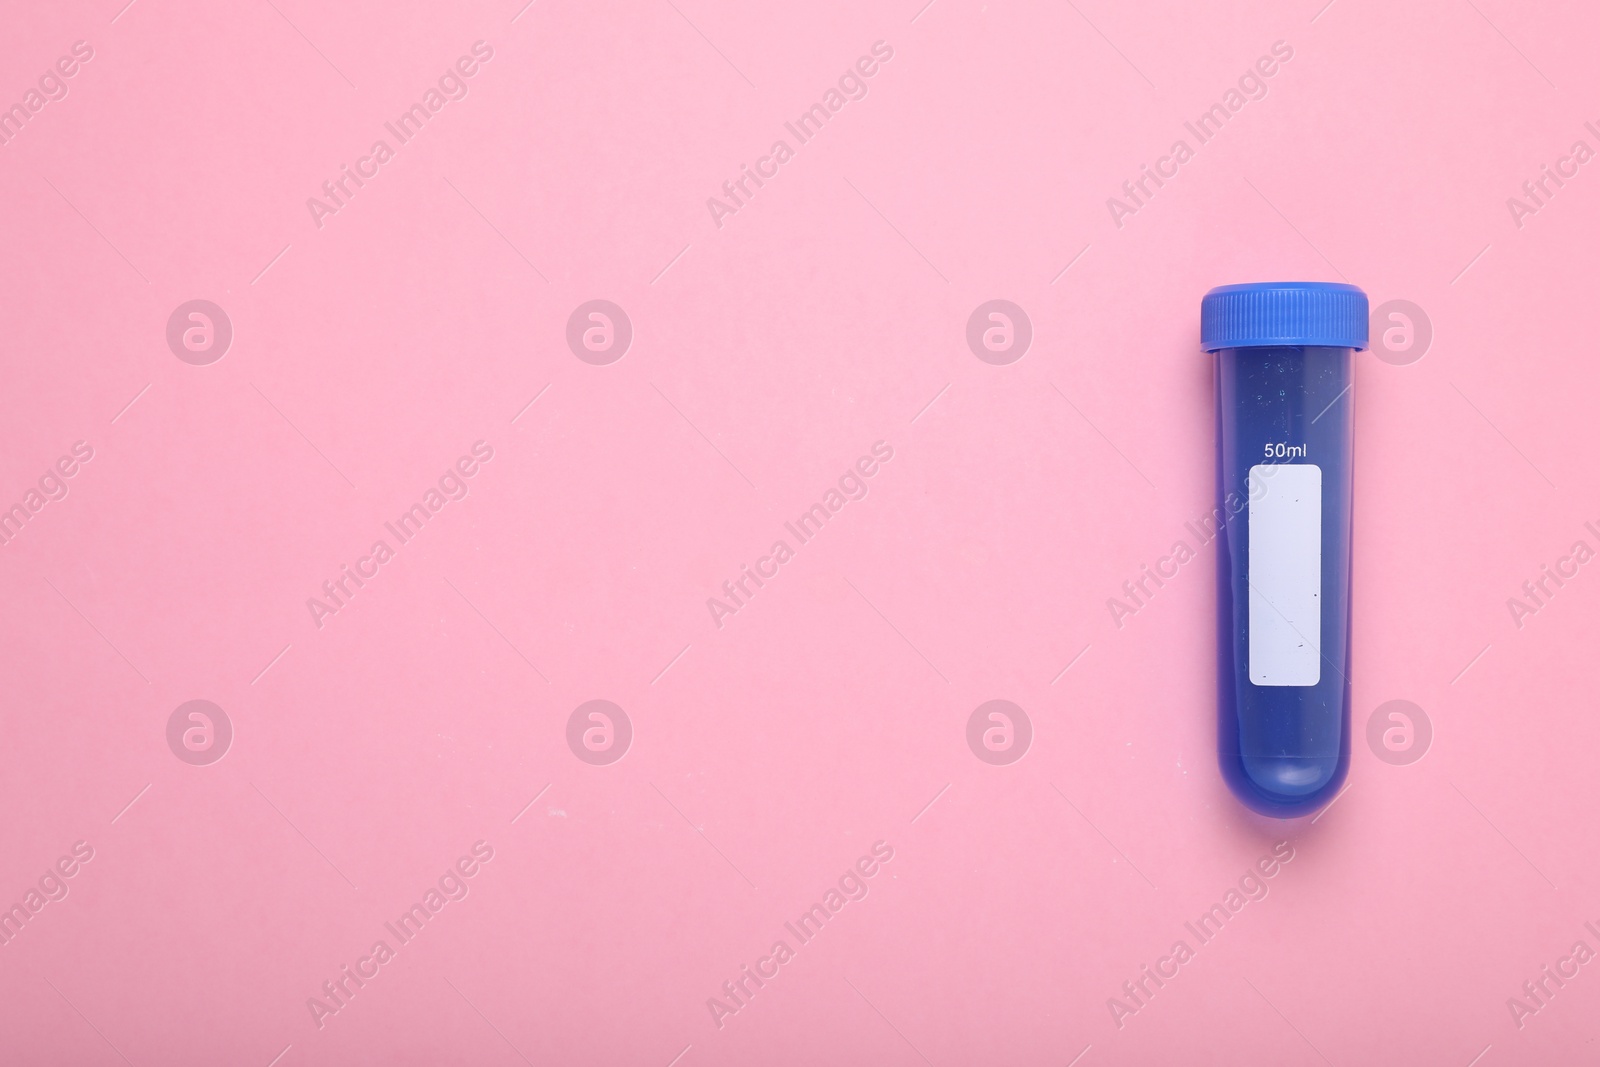 Photo of Test tube with liquid on pink background, top view and space for text. Kids chemical experiment toy